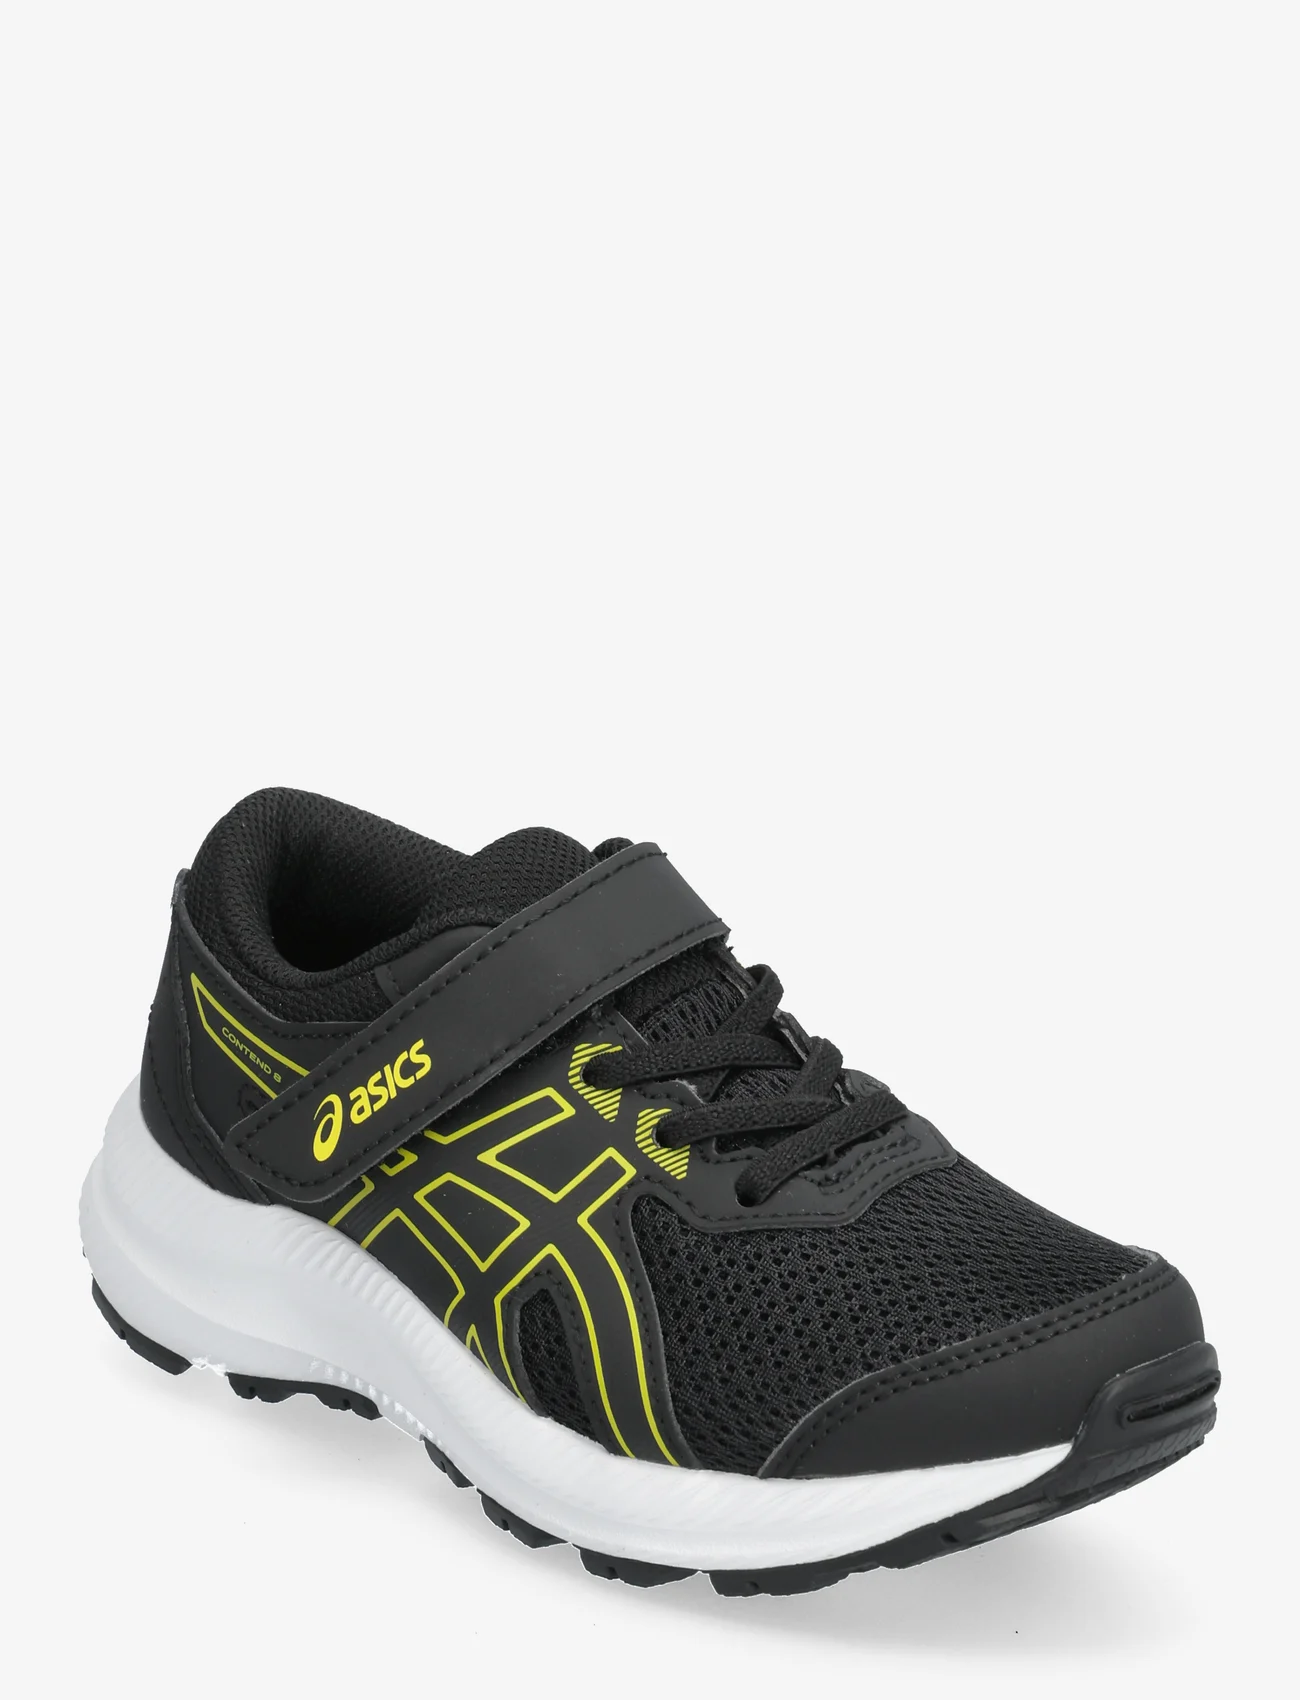 Asics - CONTEND 8 PS - running shoes - black/bright yellow - 0